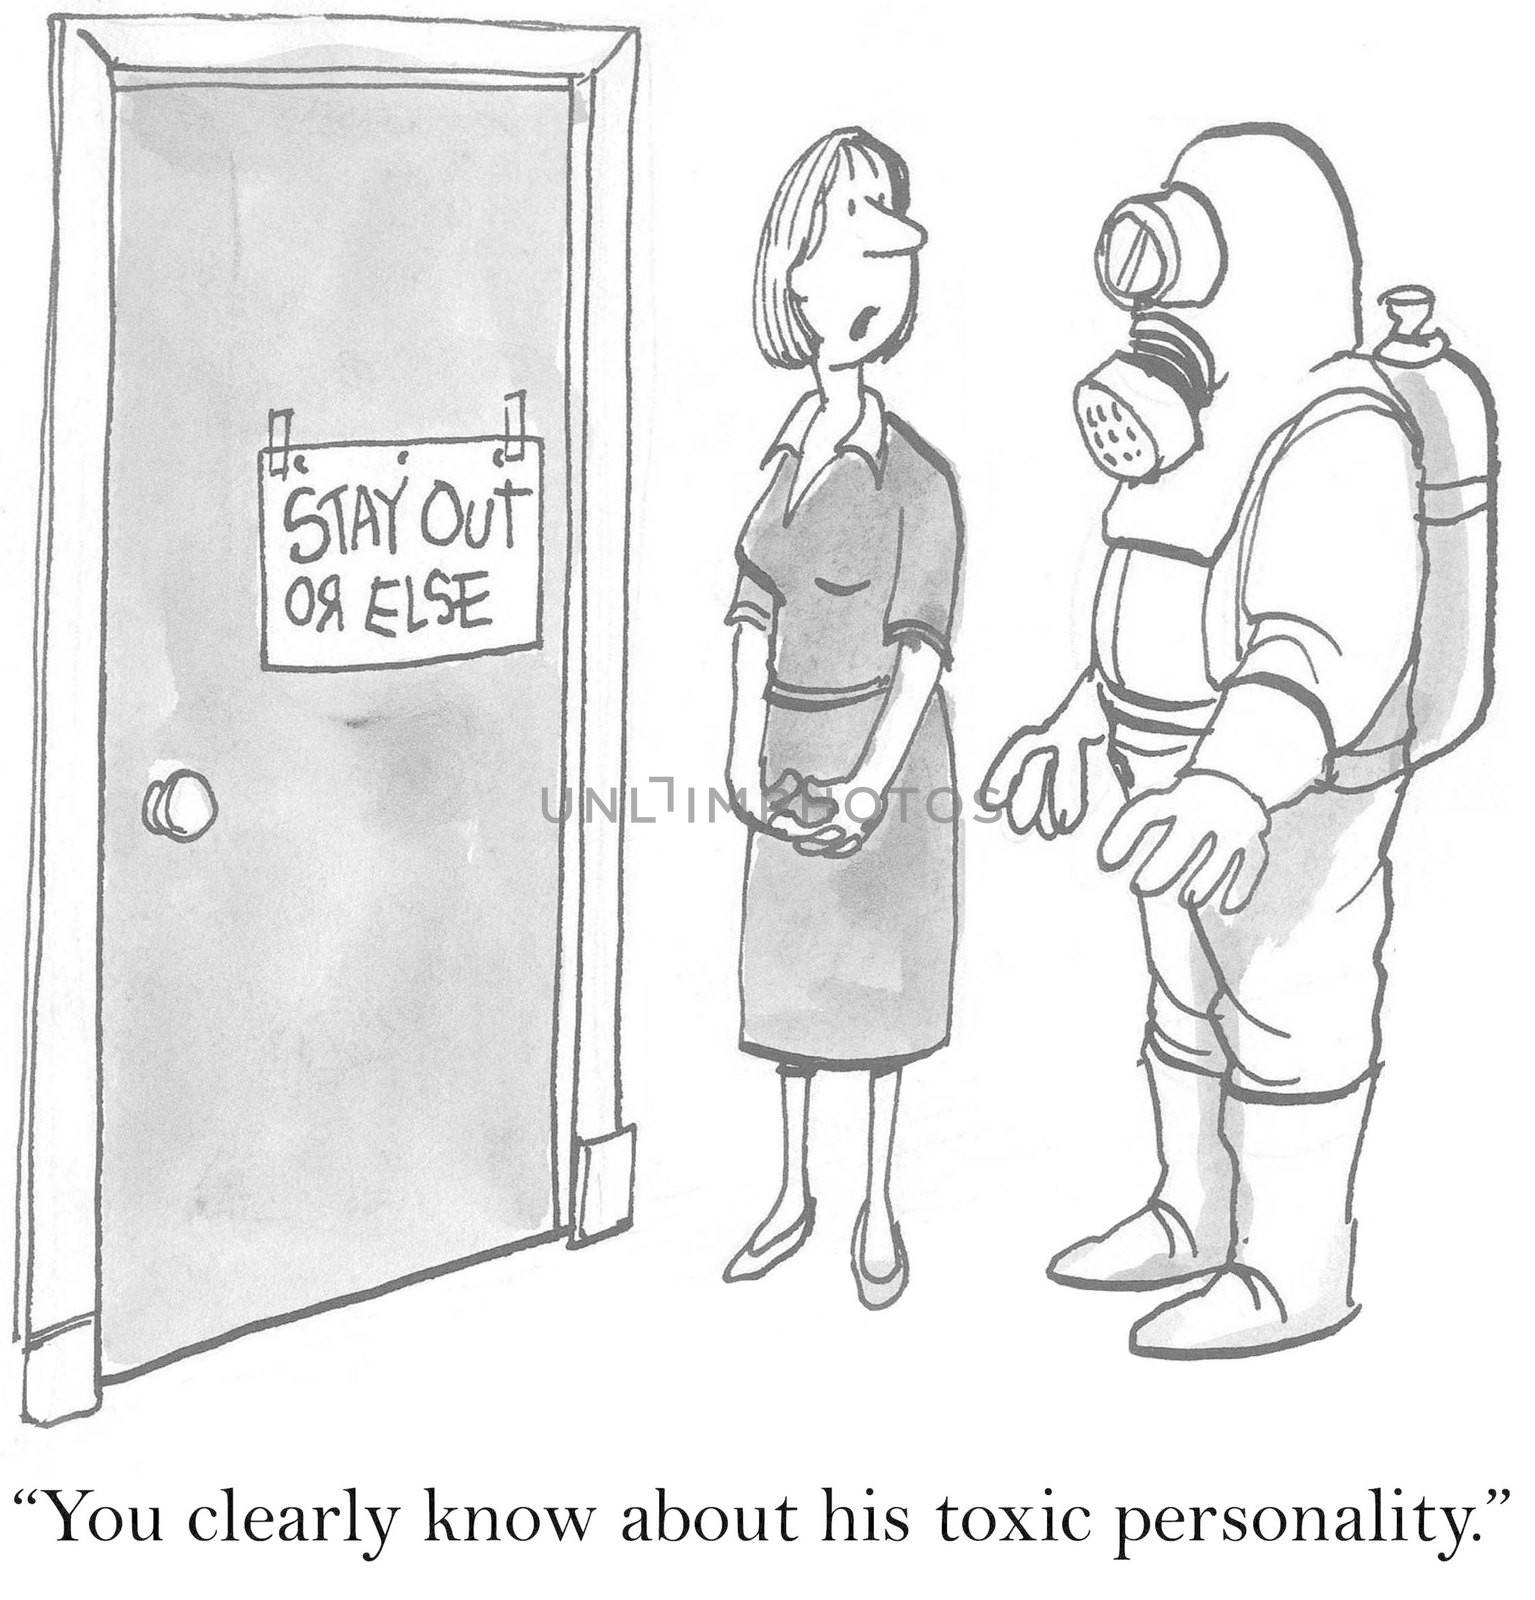 "You clearly know about his toxic personality."  (Stay Out or Else)